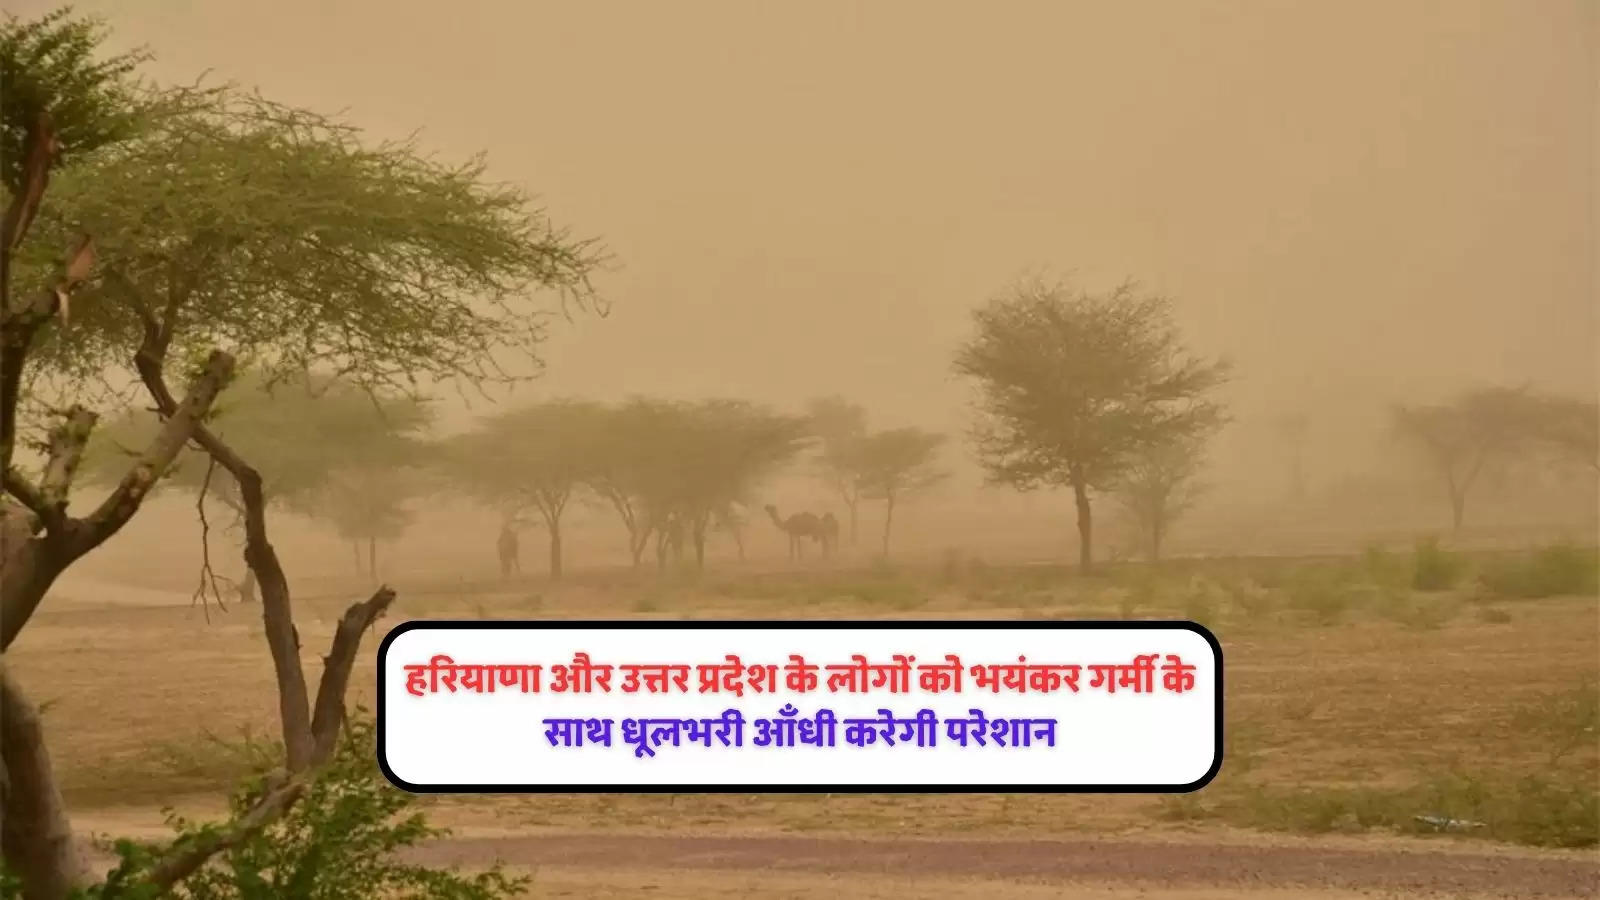 ust-storm-in-haryana-uttar-pradesh-heat-wave-conditions-in-these-parts-and-heavy-rains-in-northeas